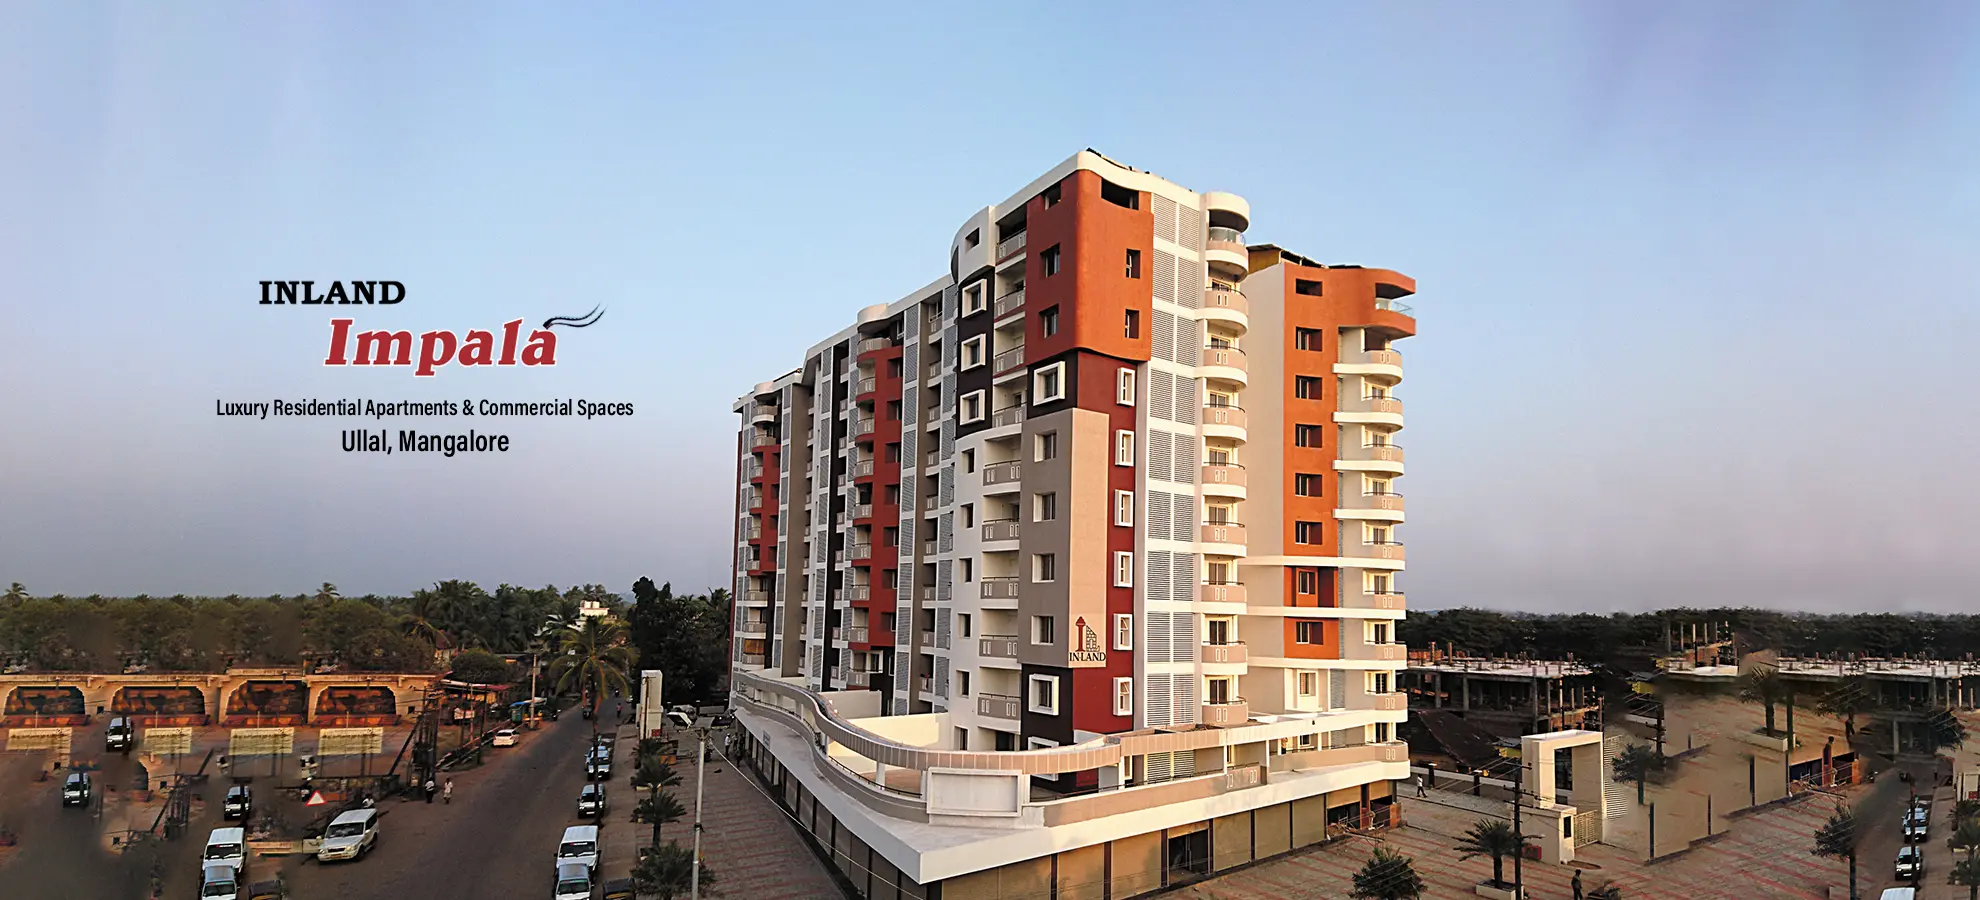 IN-LAND Impala- Beach front Apartments and Flats for Sale in Mangalore